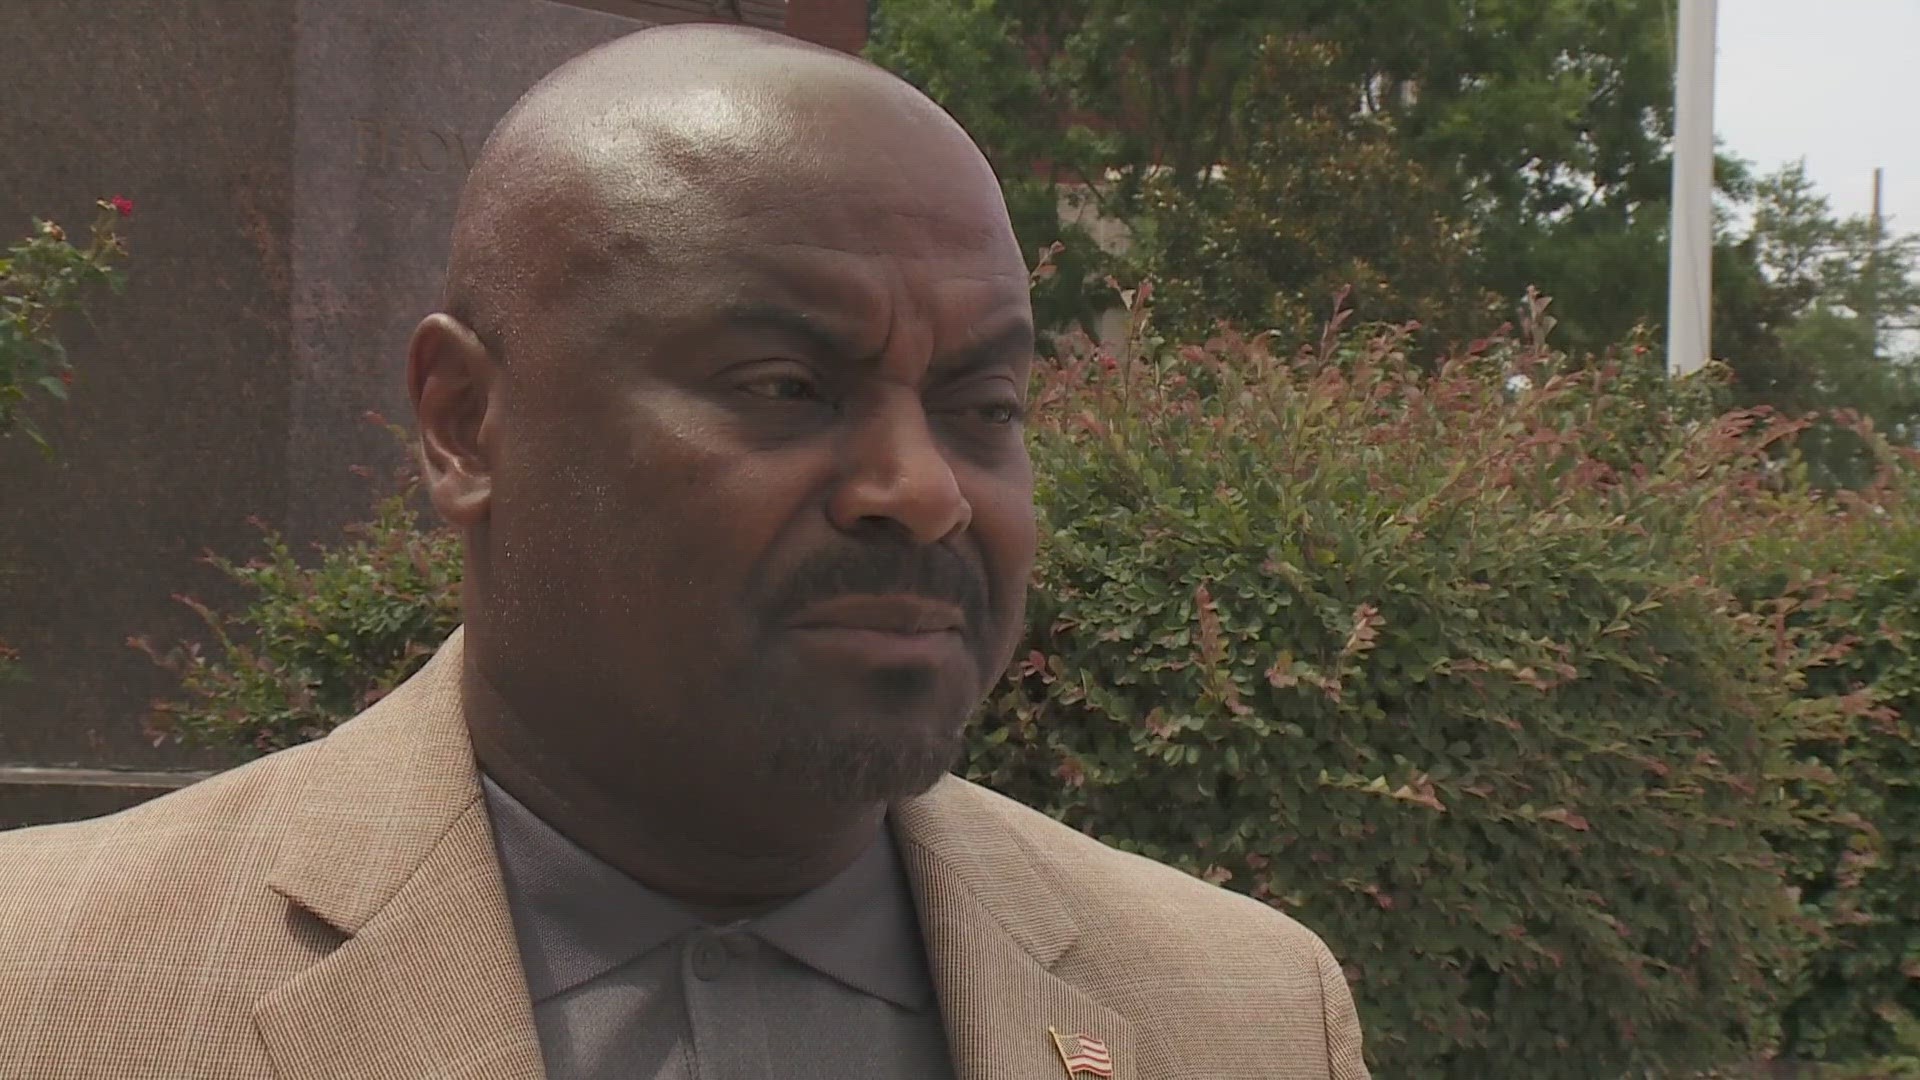 The incumbent, Byron Lee, was found to be qualified to run, while his main opponent, Derrick Shepherd was disqualified.